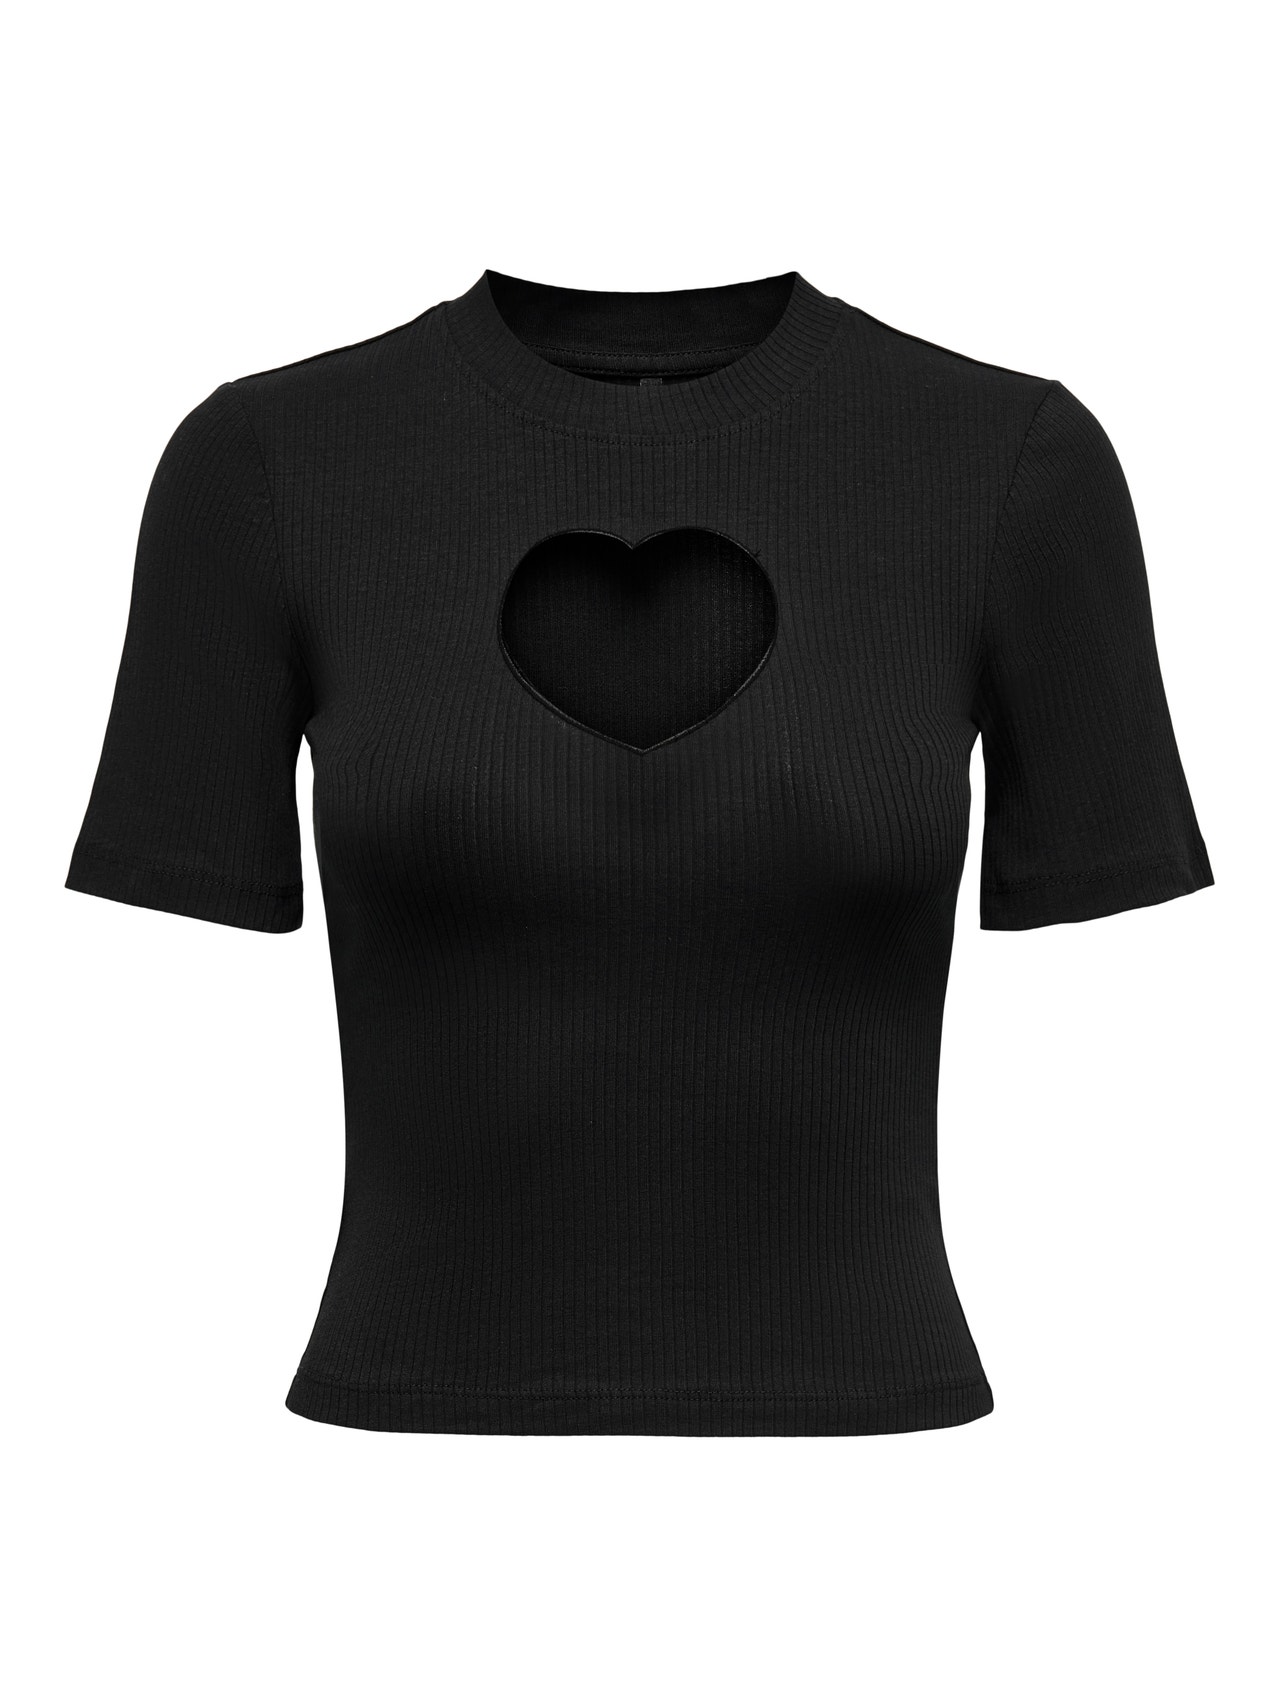 ONLY Regular Fit Top With Heart Cut Out -Black - 15289918